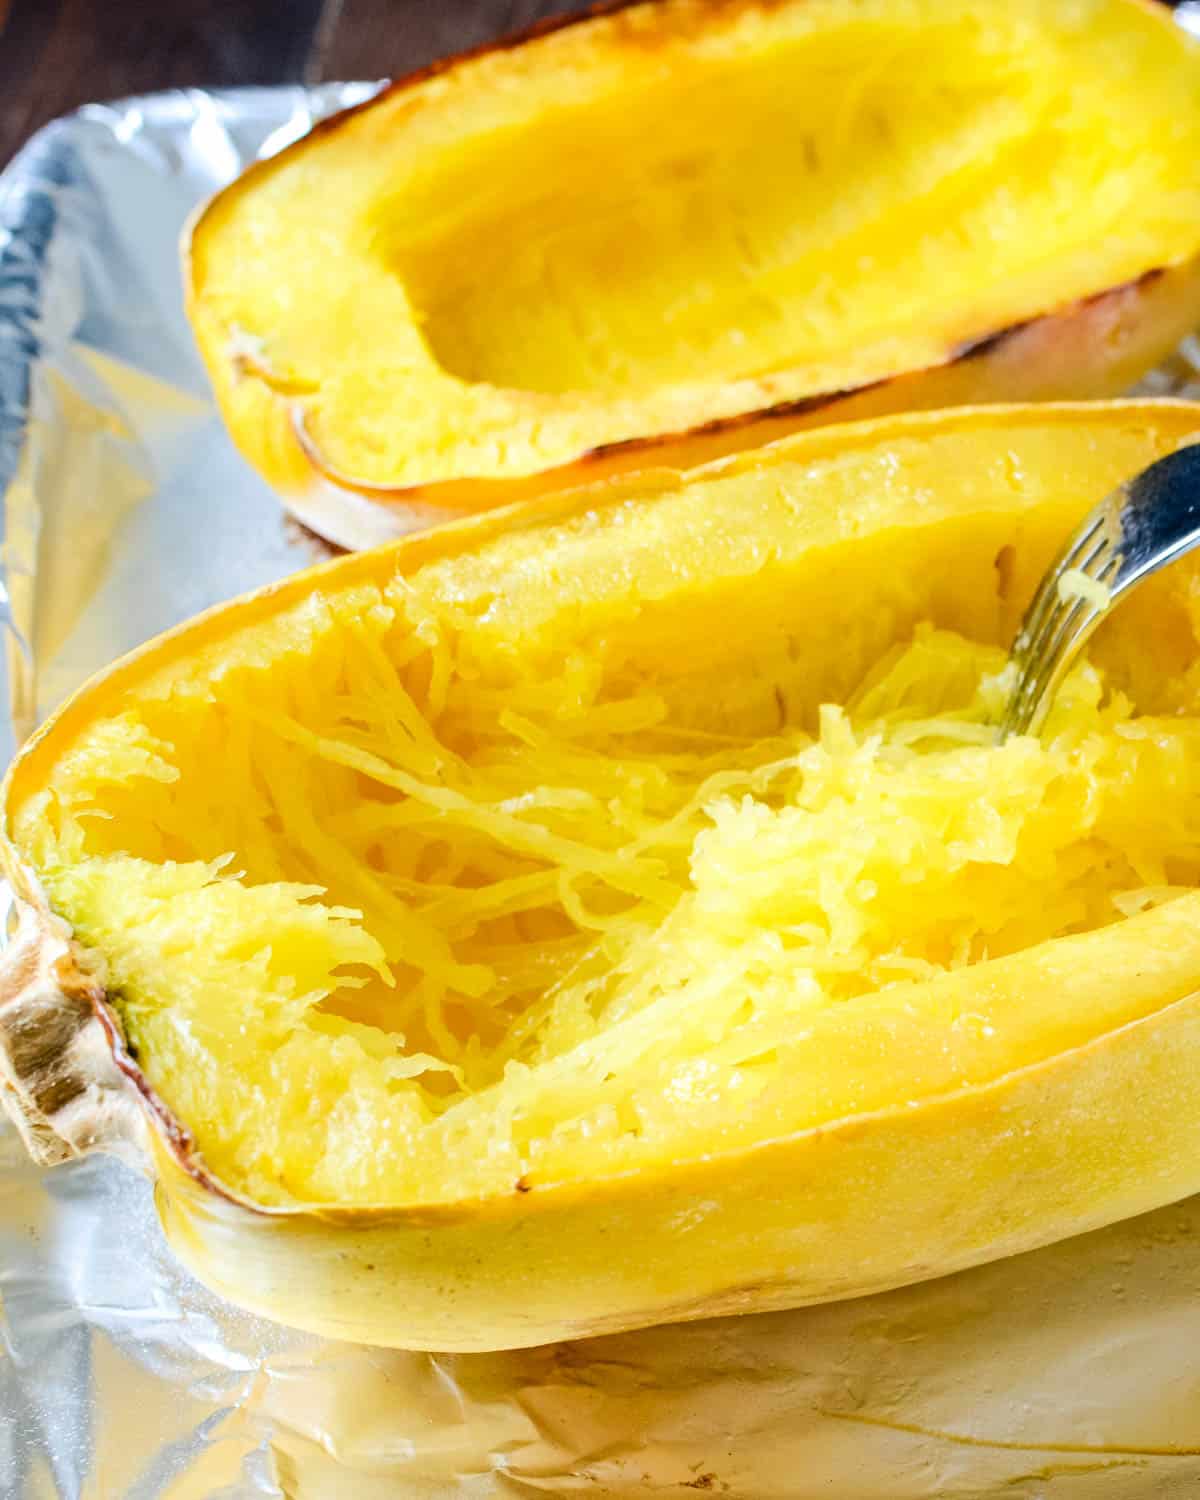 Scraping the strands of spaghetti squash using a fork.